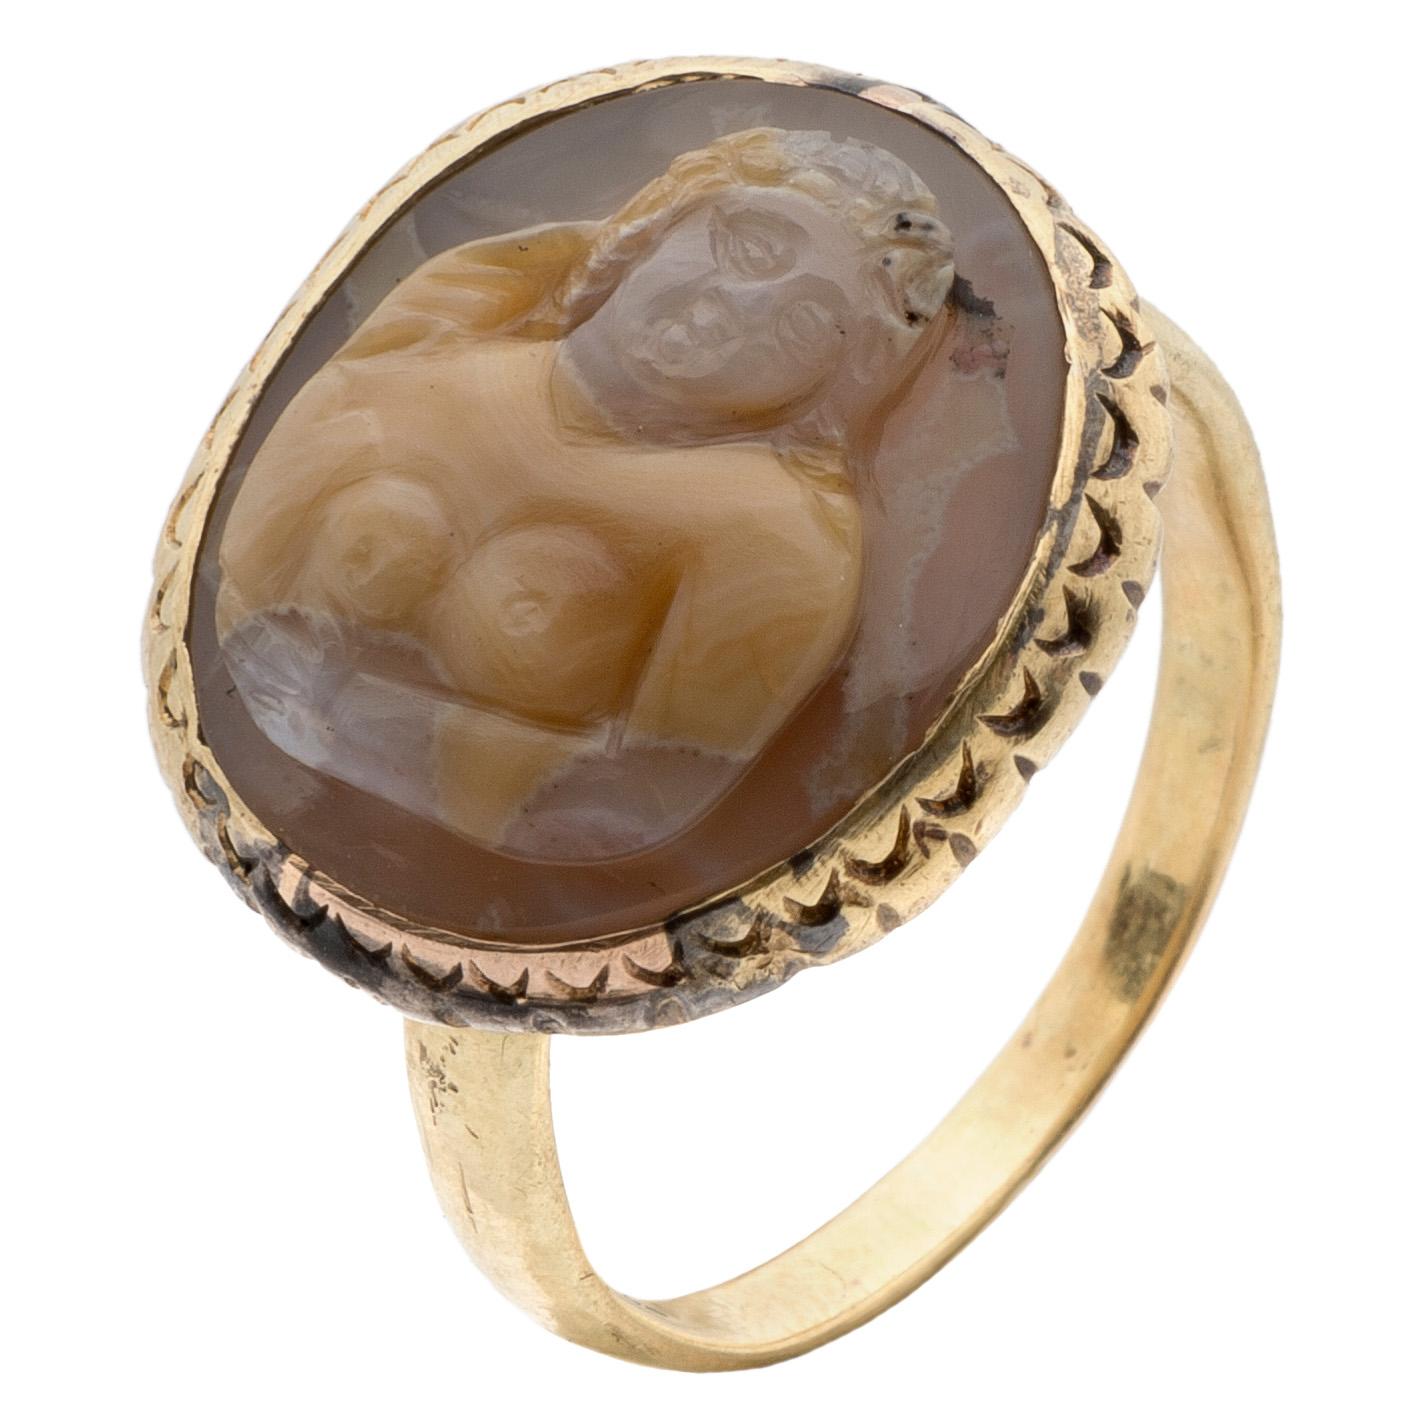 RENAISSANCE CAMEO RING 
Italy, cameo: second half of 16th century in a late 18th century ring 
Gold, agate , black enamel 
Weight 6.3 gr.; bezel 18.8 x 16.9 x 6.5 mm.; circumference 58.4 mm.; US size 8¾; UK size R 

Cameo of a nude female bust in